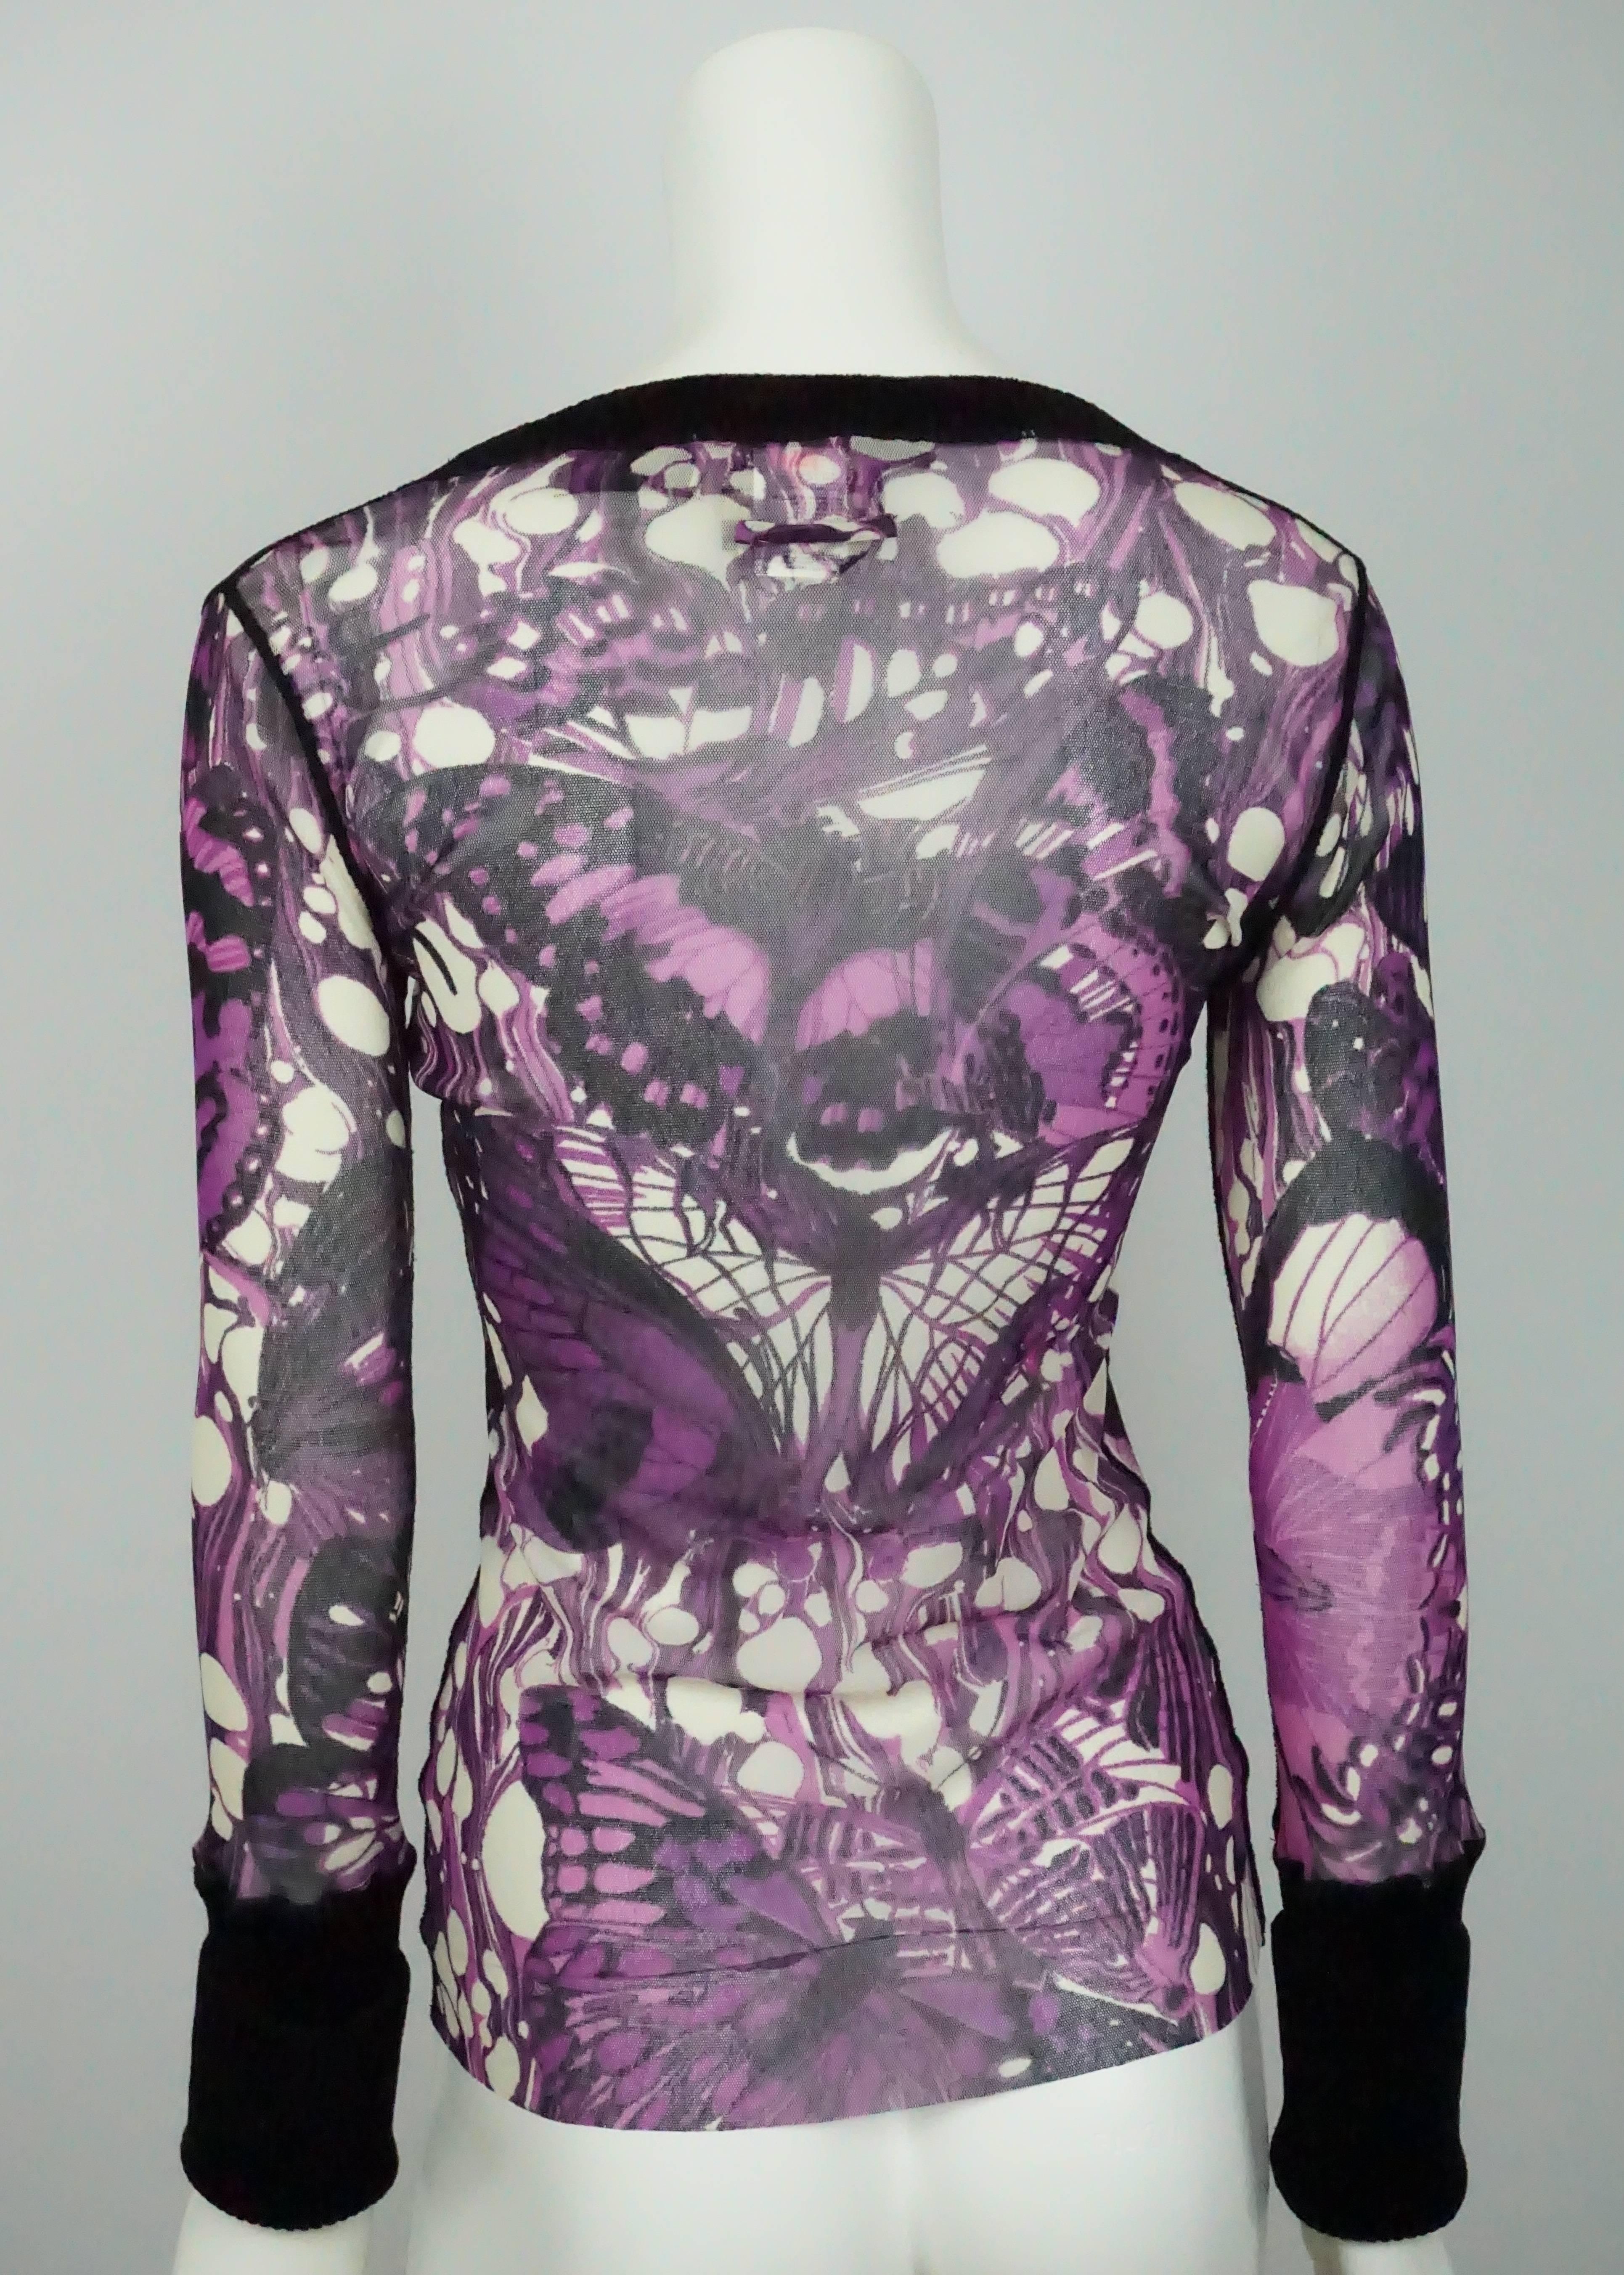 Jean Paul Gaultier Purple Print Mesh Top w/ Velvet - Large  This unique top is in excellent condition. The top has a print that consists of purple butterflies. The purple butterfly part of the top is made of a mesh material and is sheer. The collar